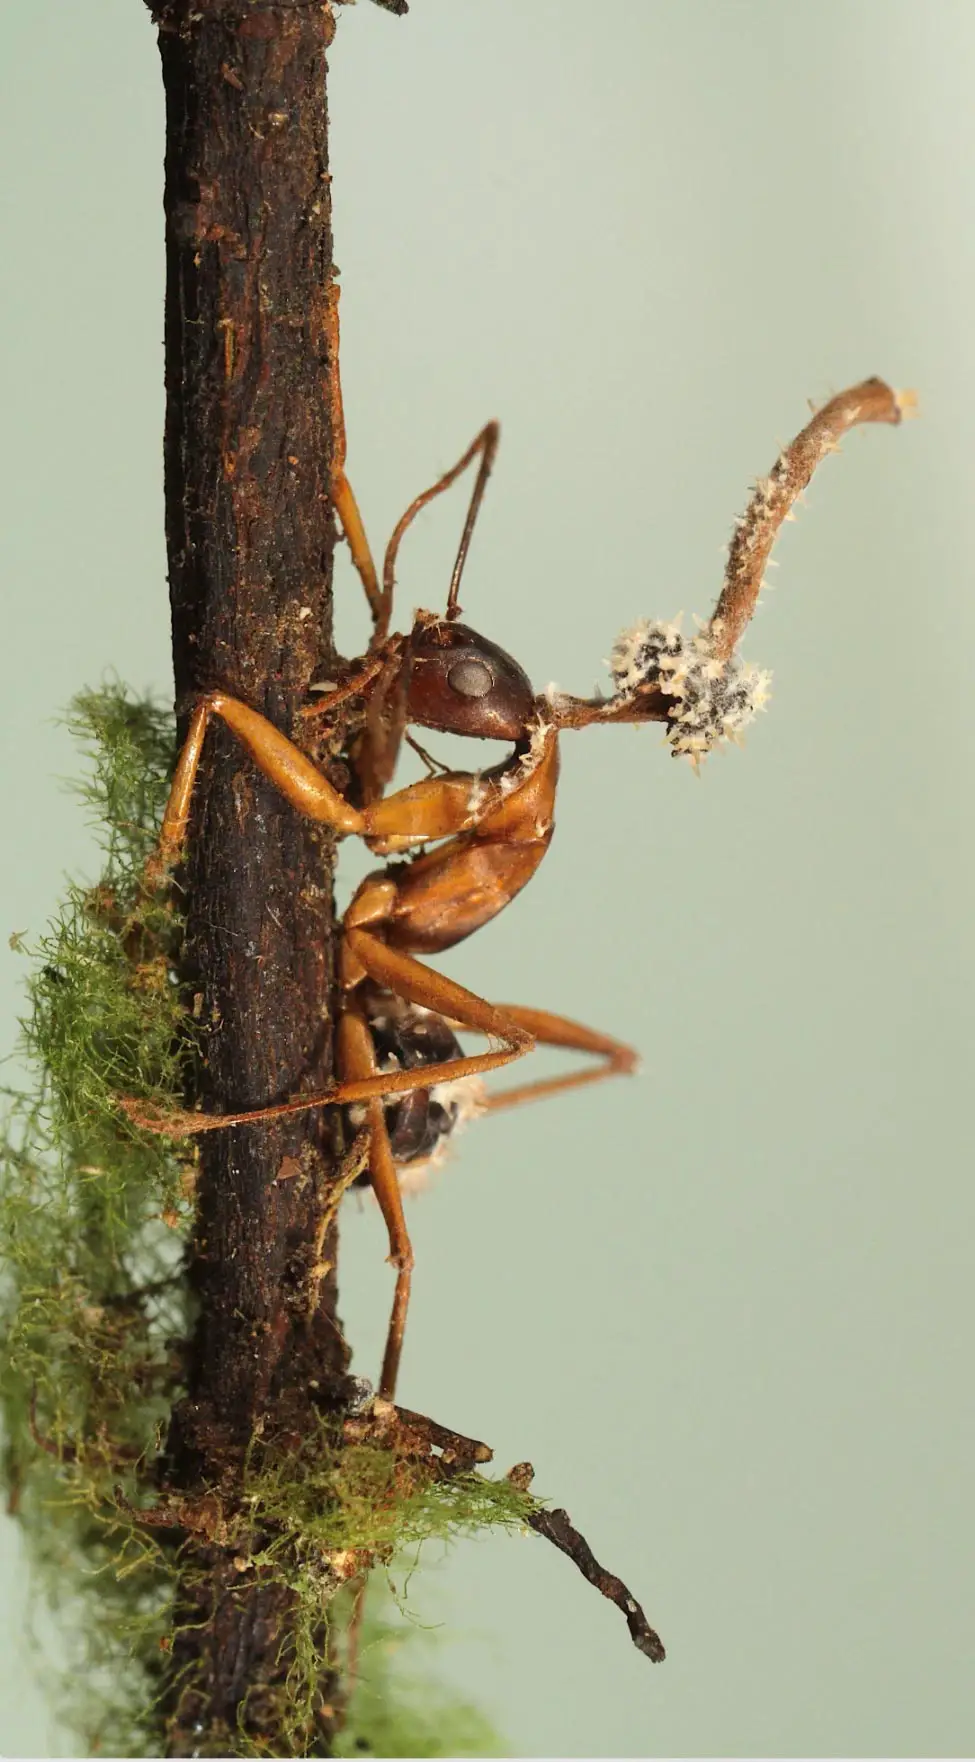 A mycoparasitic fungus parasitizing the fruiting body of a zombie-ant fungus.